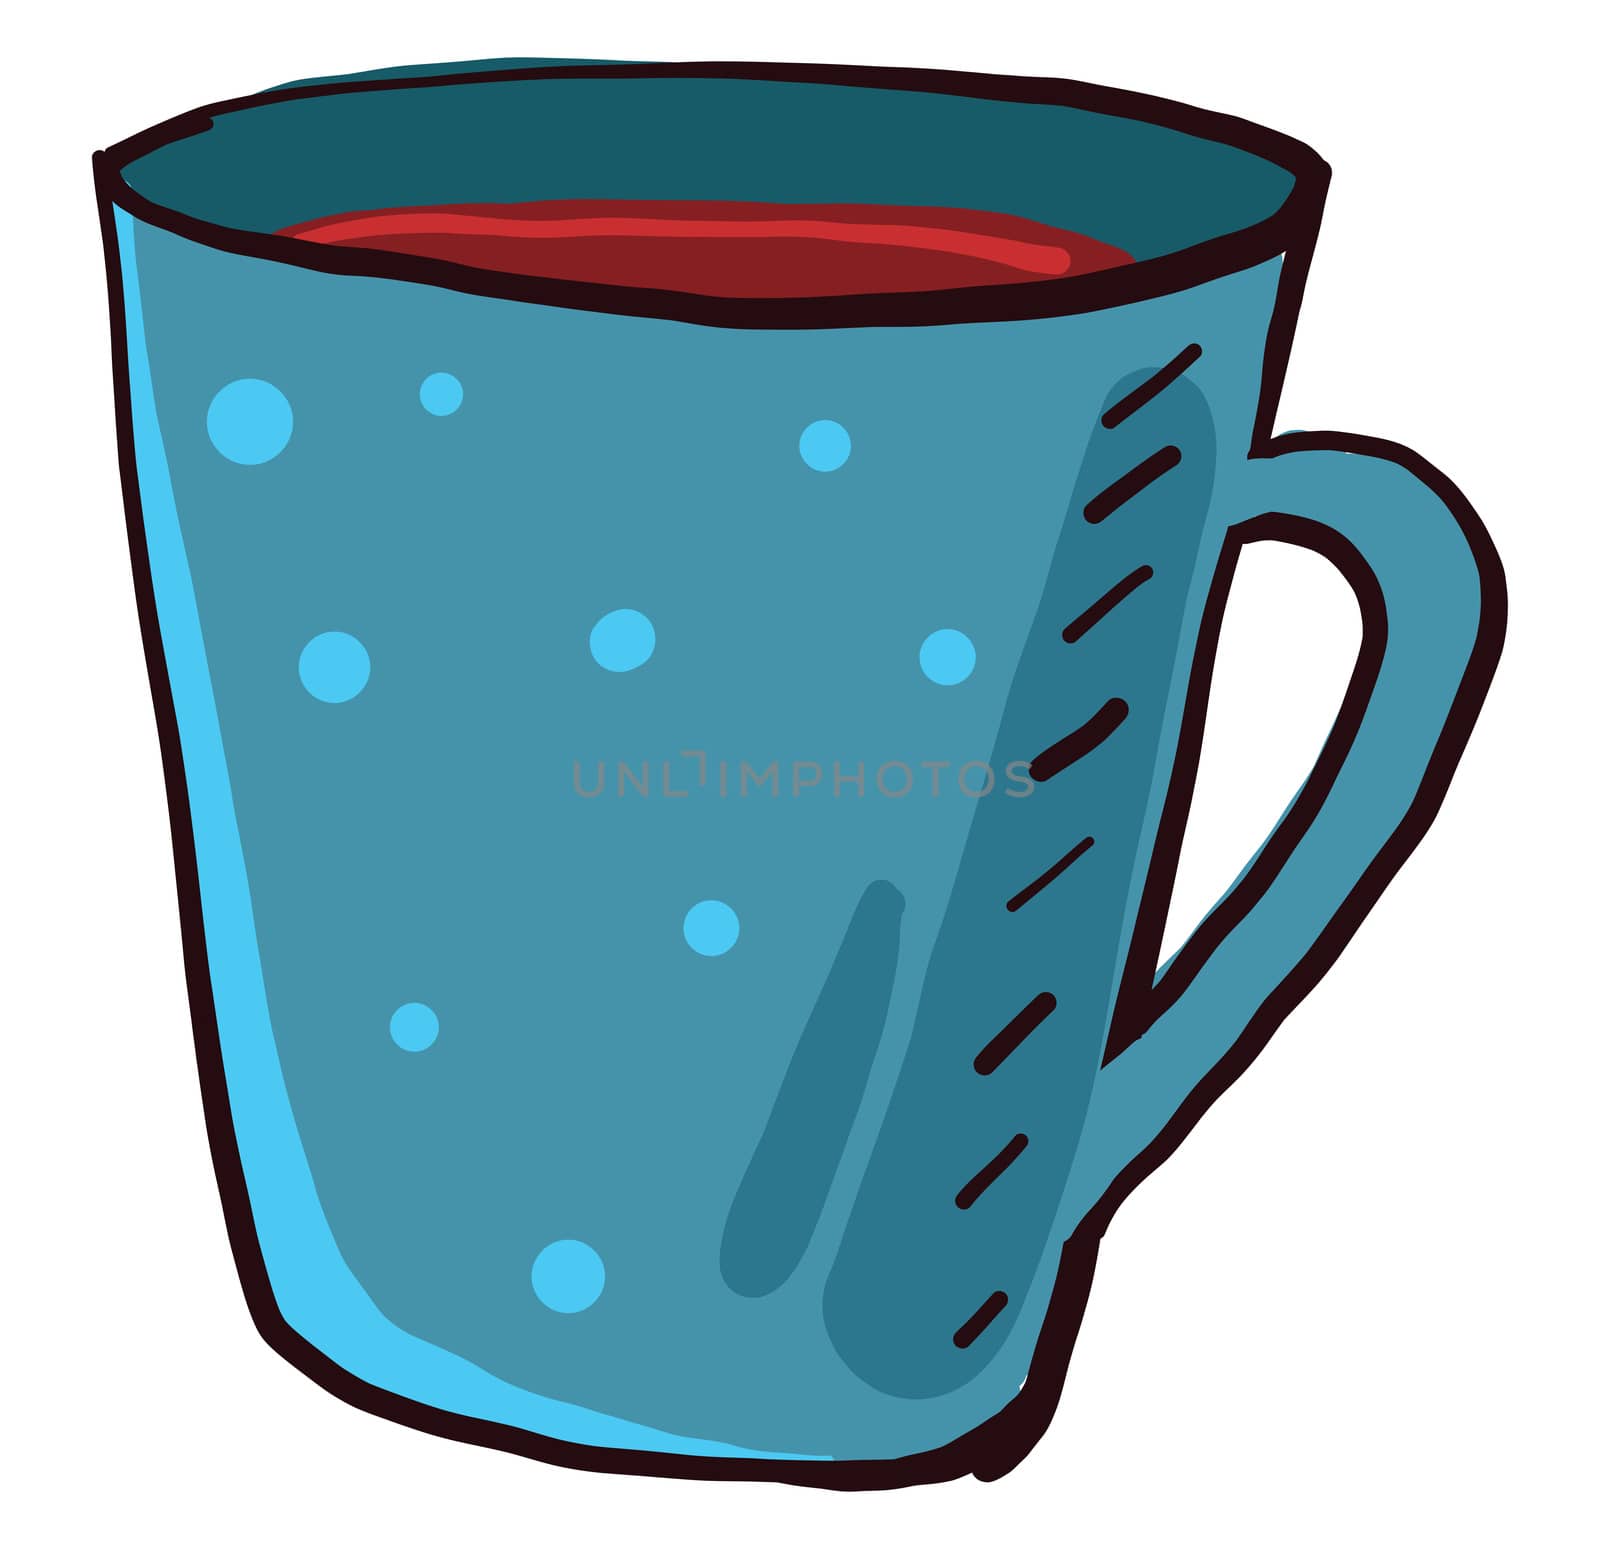 Tea in blue cup , illustration, vector on white background